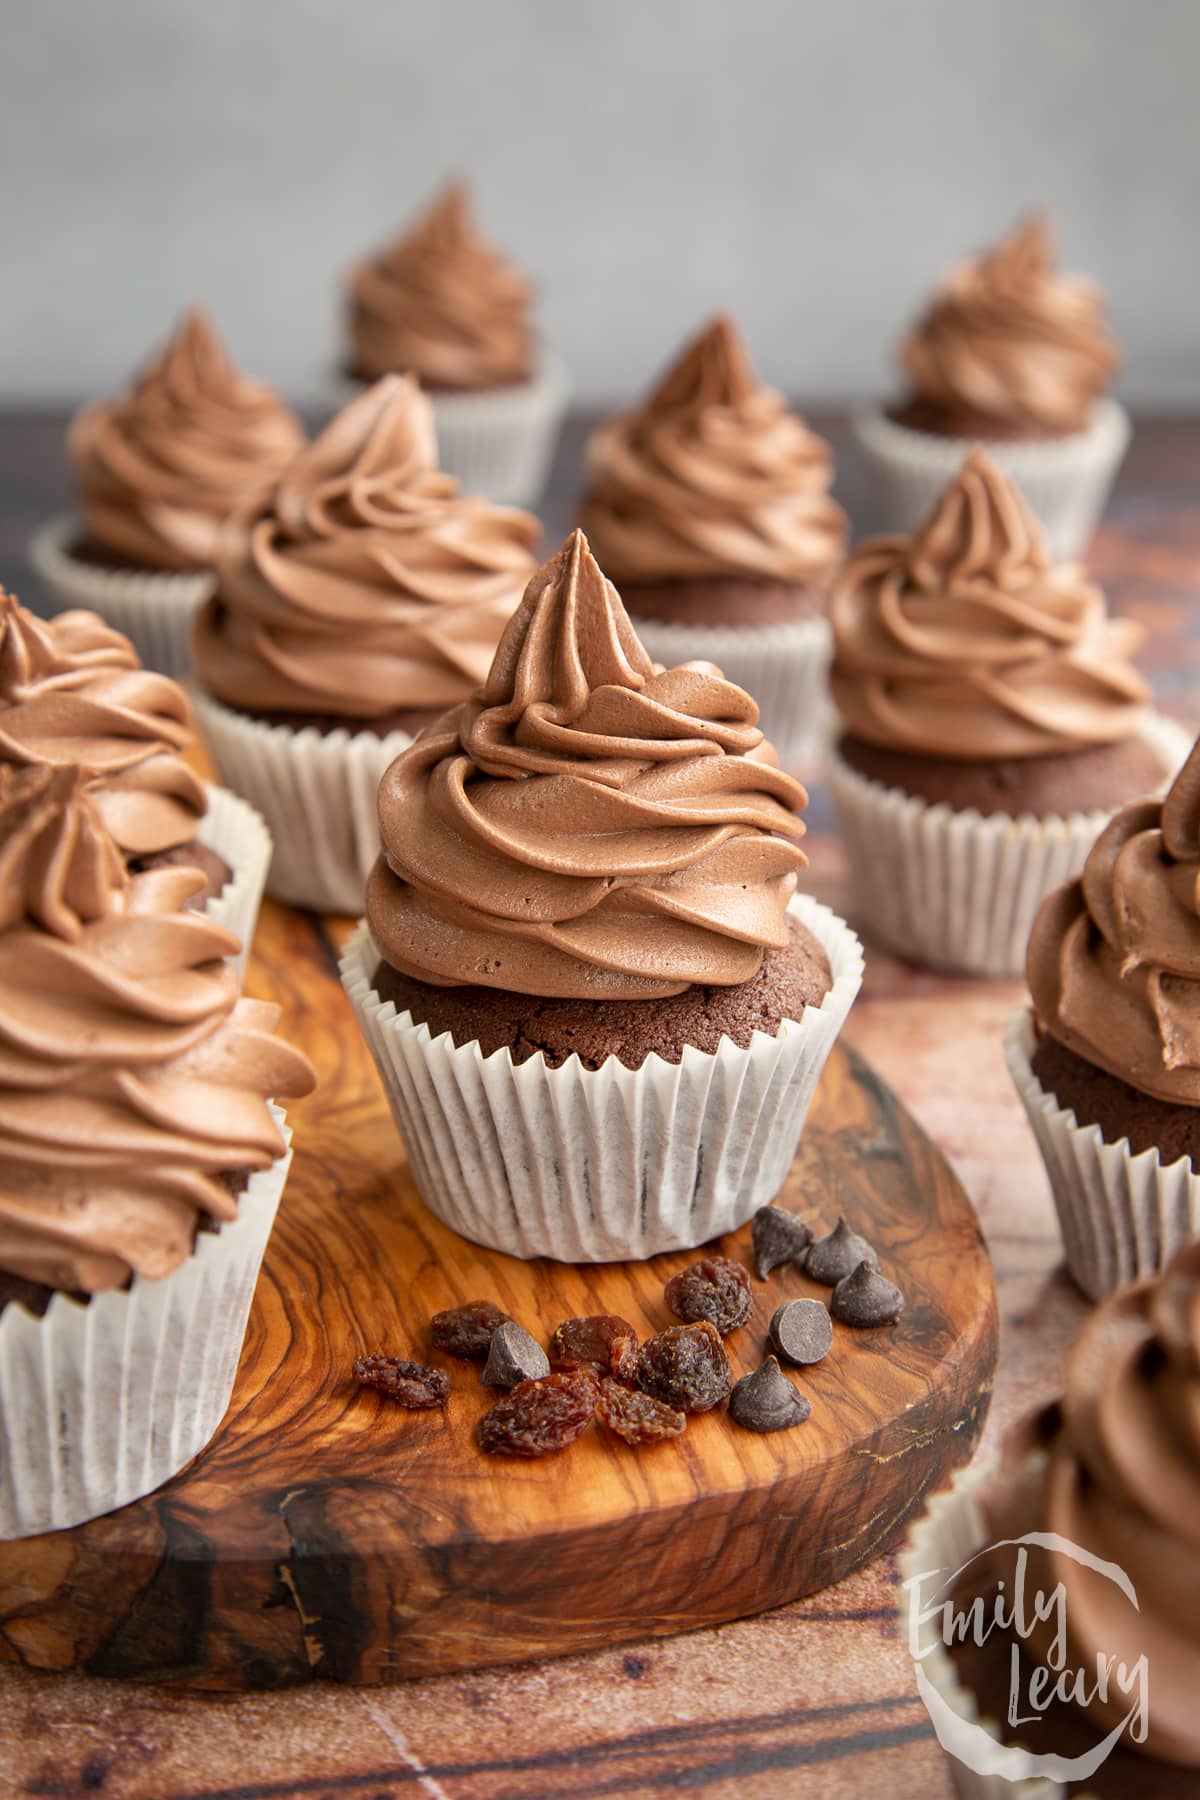 Nutella buttercream piped onto cupcakes.